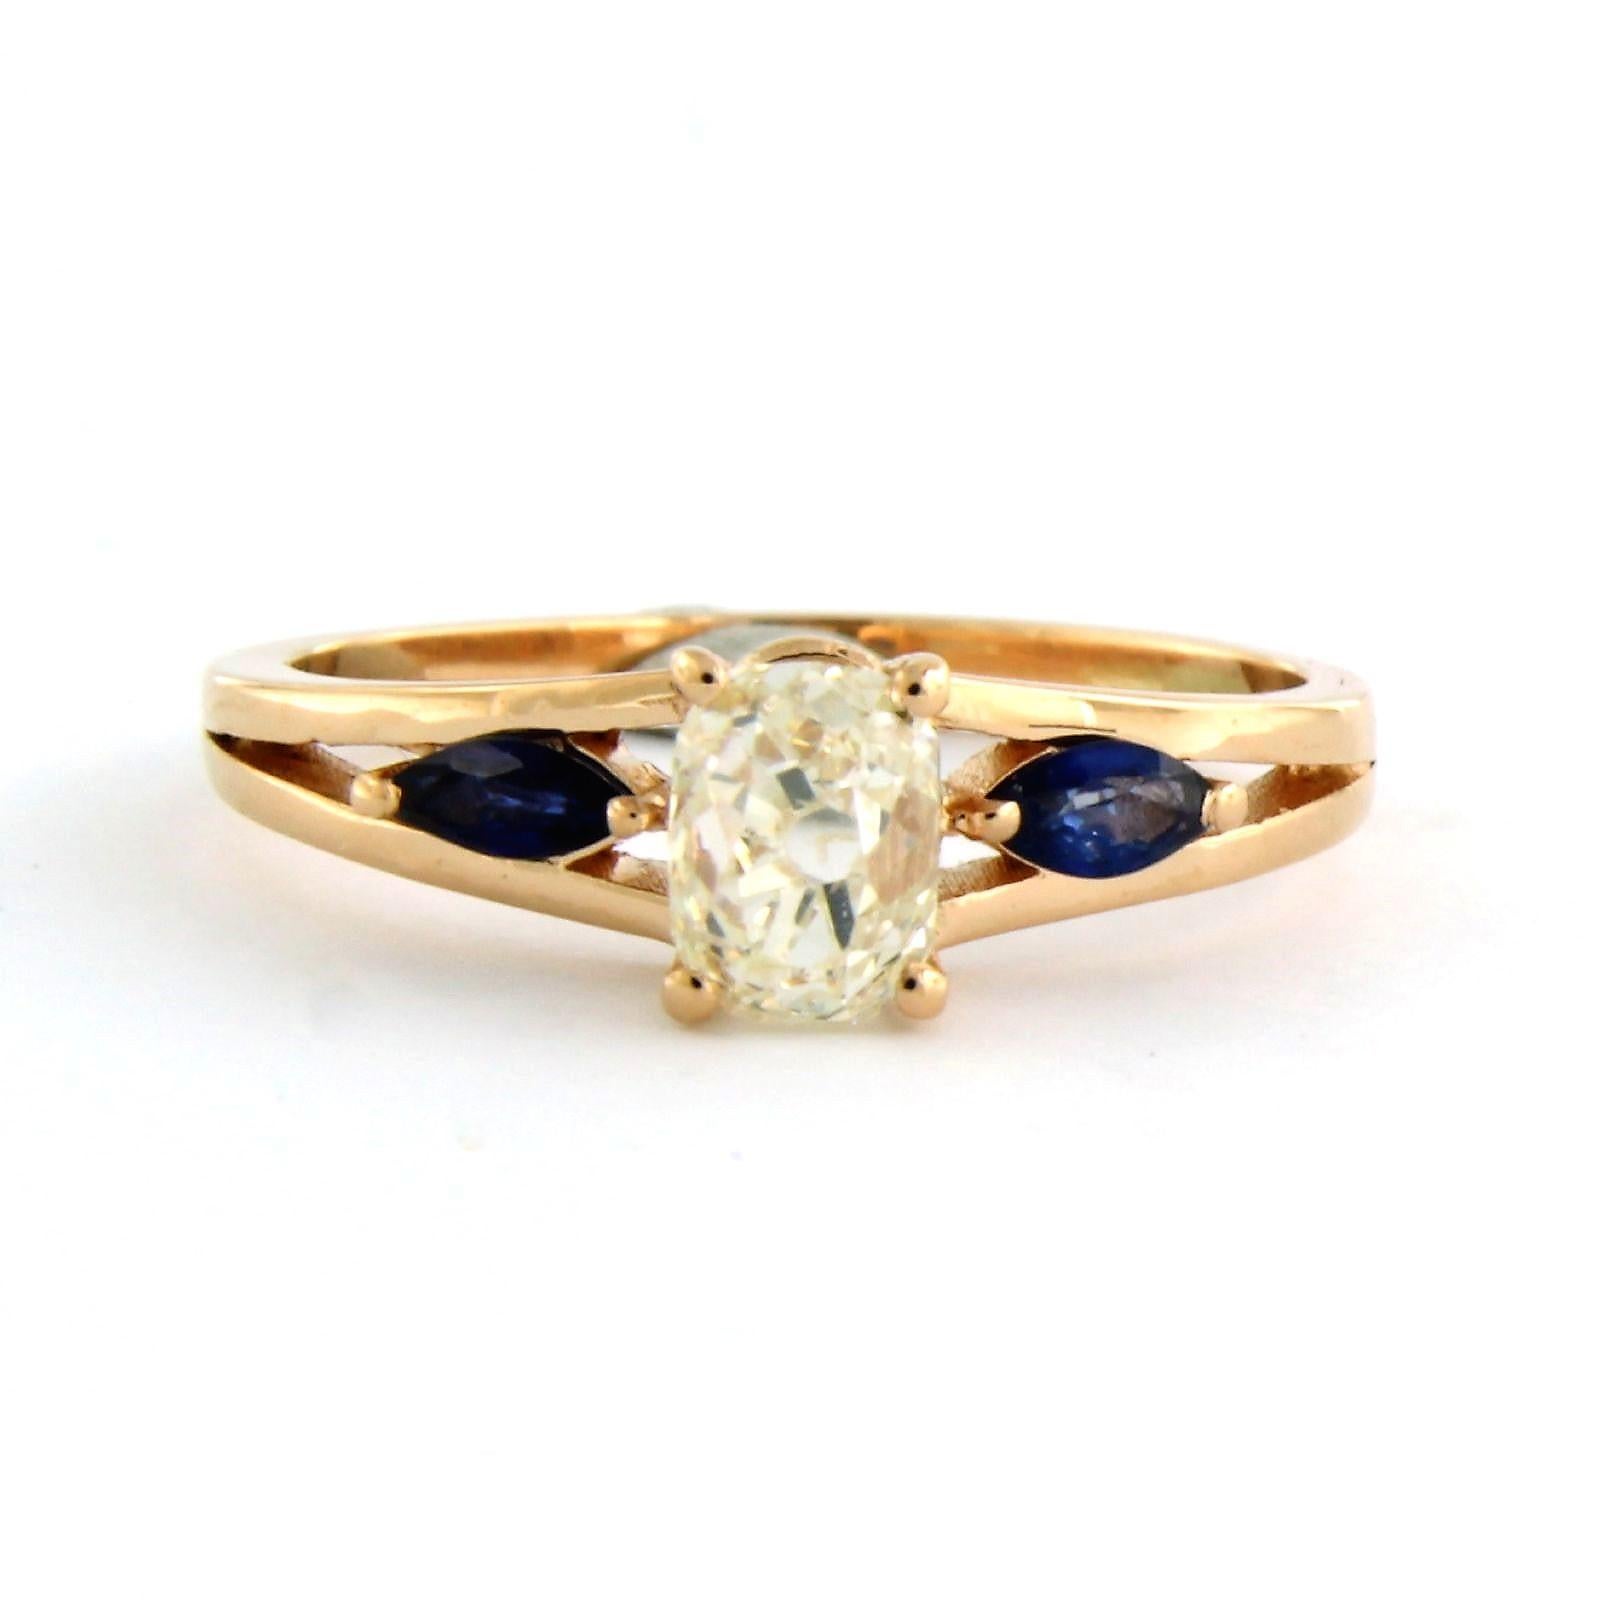 18k pink gold ring set with sapphire to. 0.26ct and an oval cut old mine cut in the center. 1.03ct - J/K - SI - ring size U.S. 7.25 - EU. 17.5 (55)

Detailed description:

the front of the ring is 6.3 mm wide by 6.8 mm high

ring size US 7.25 - EU.